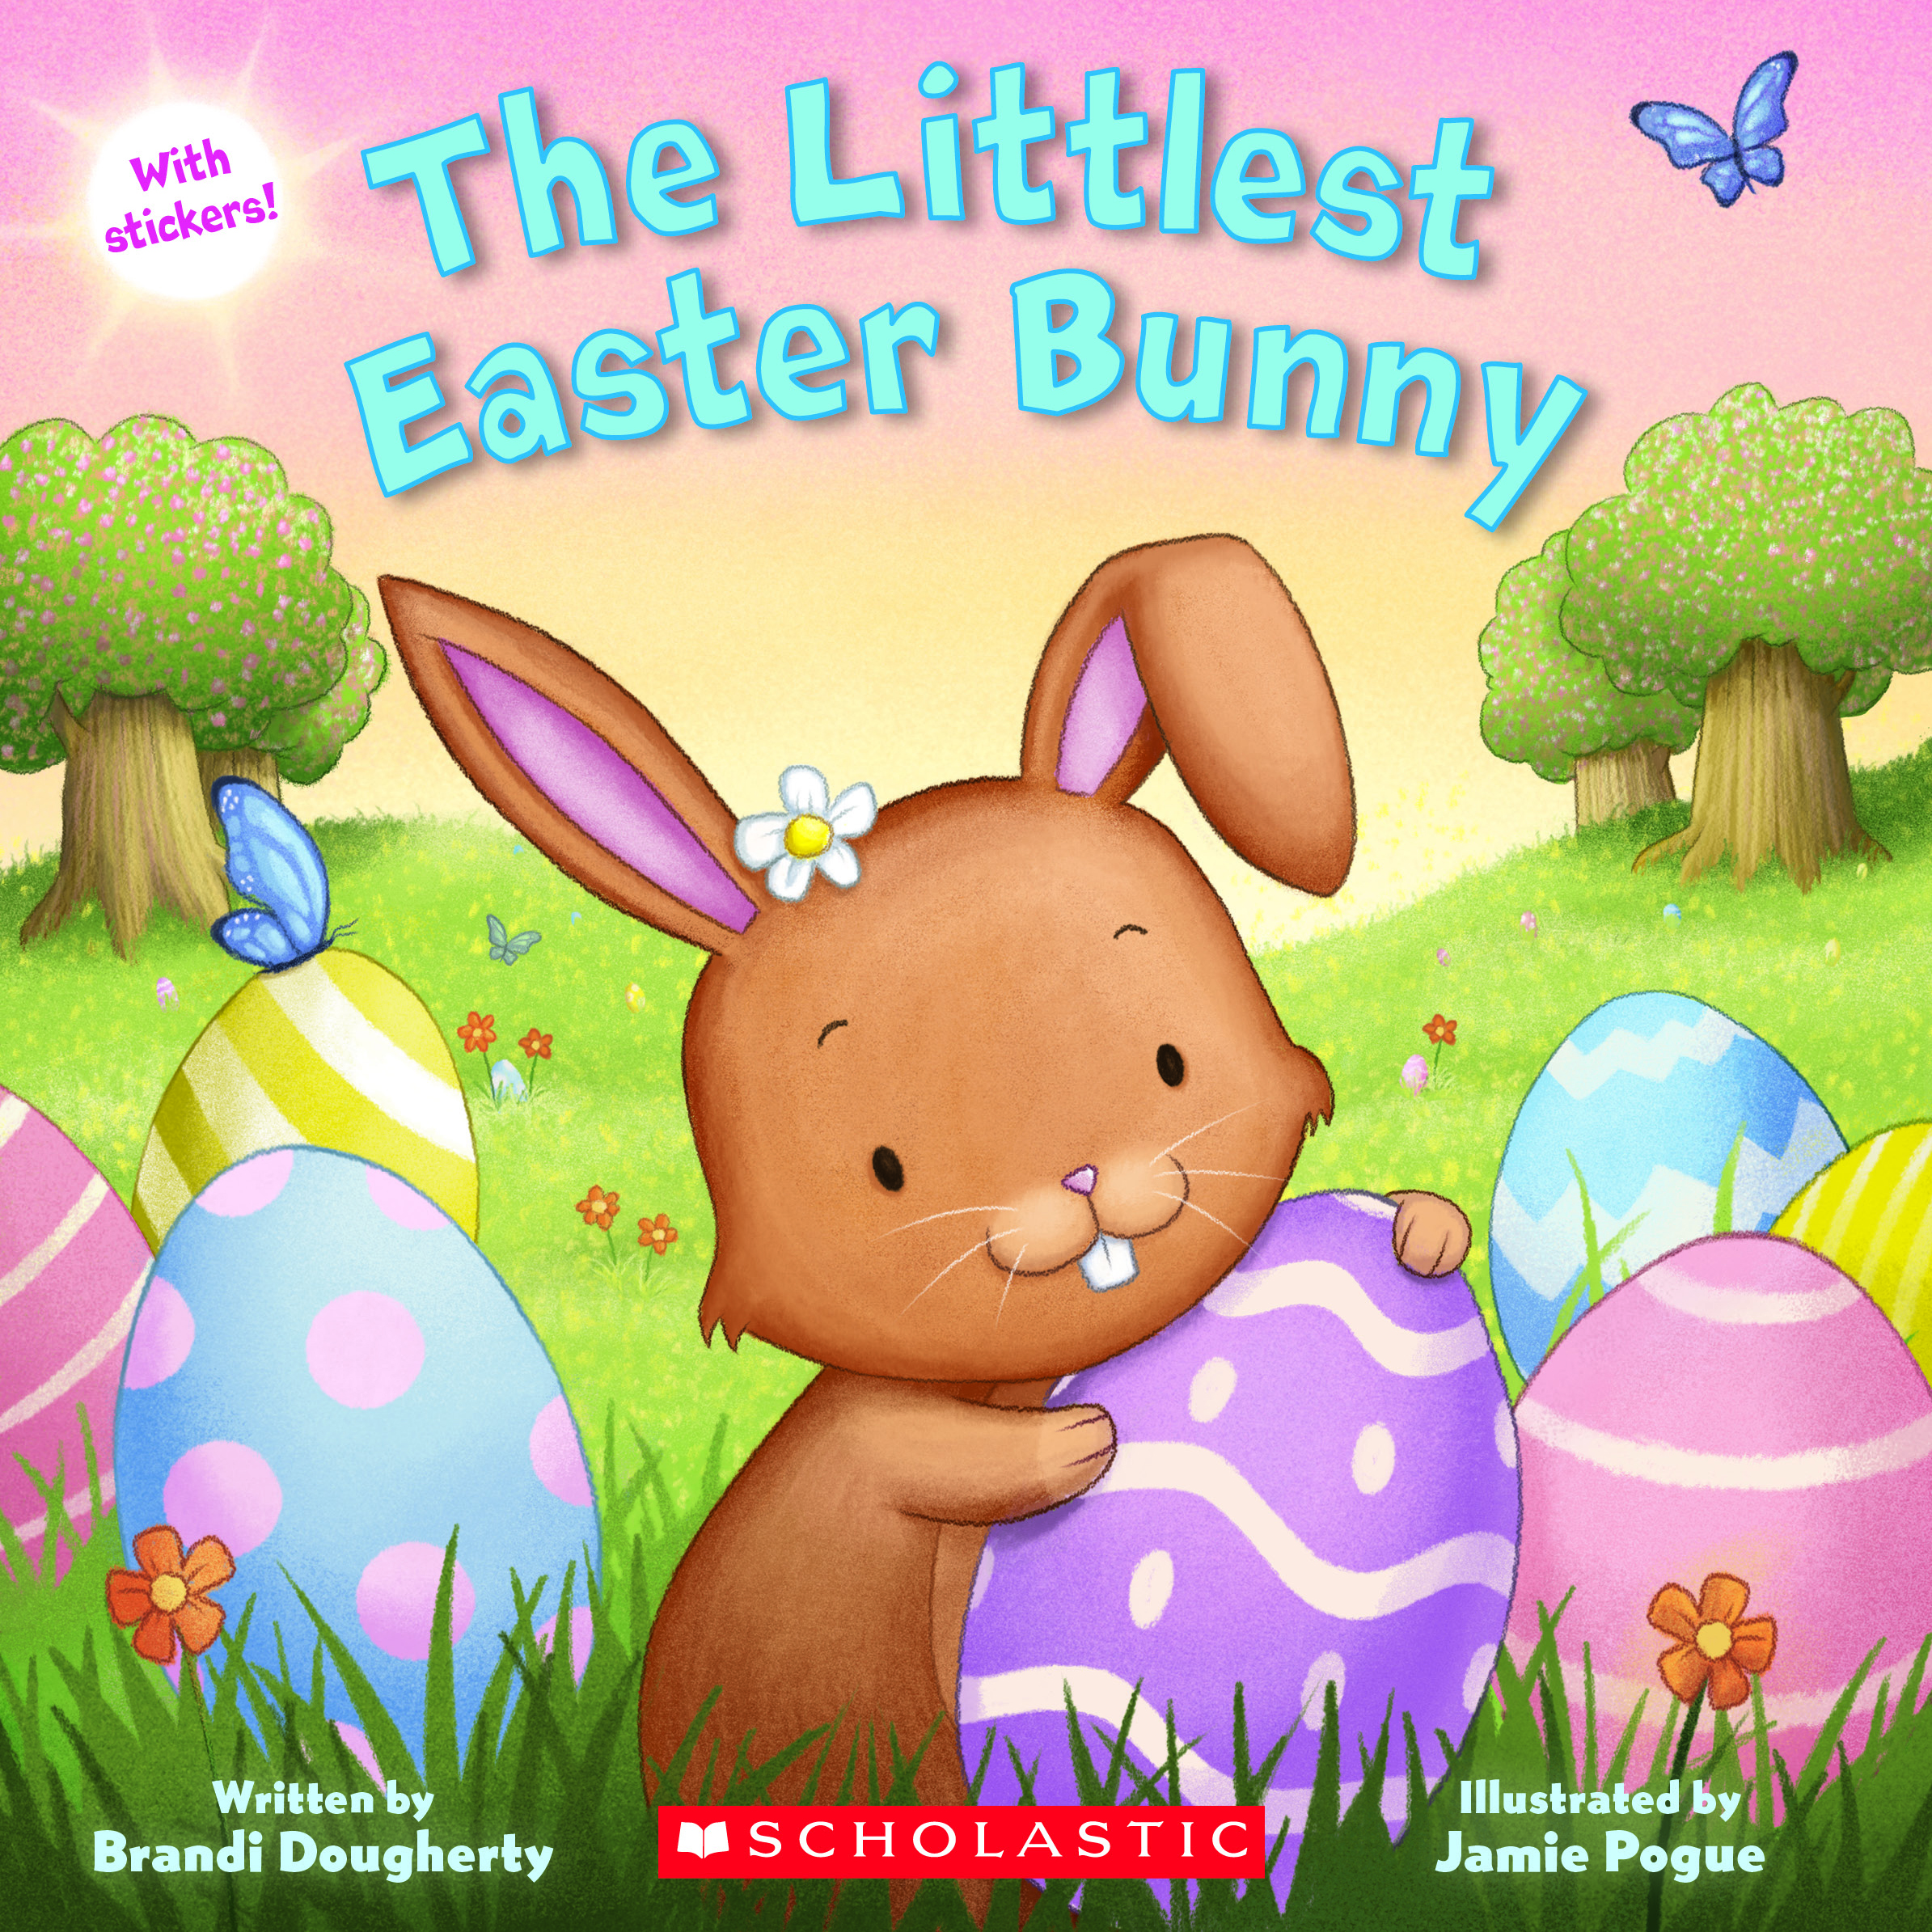 The Littlest Easter Bunny by author Brandy Dougherty